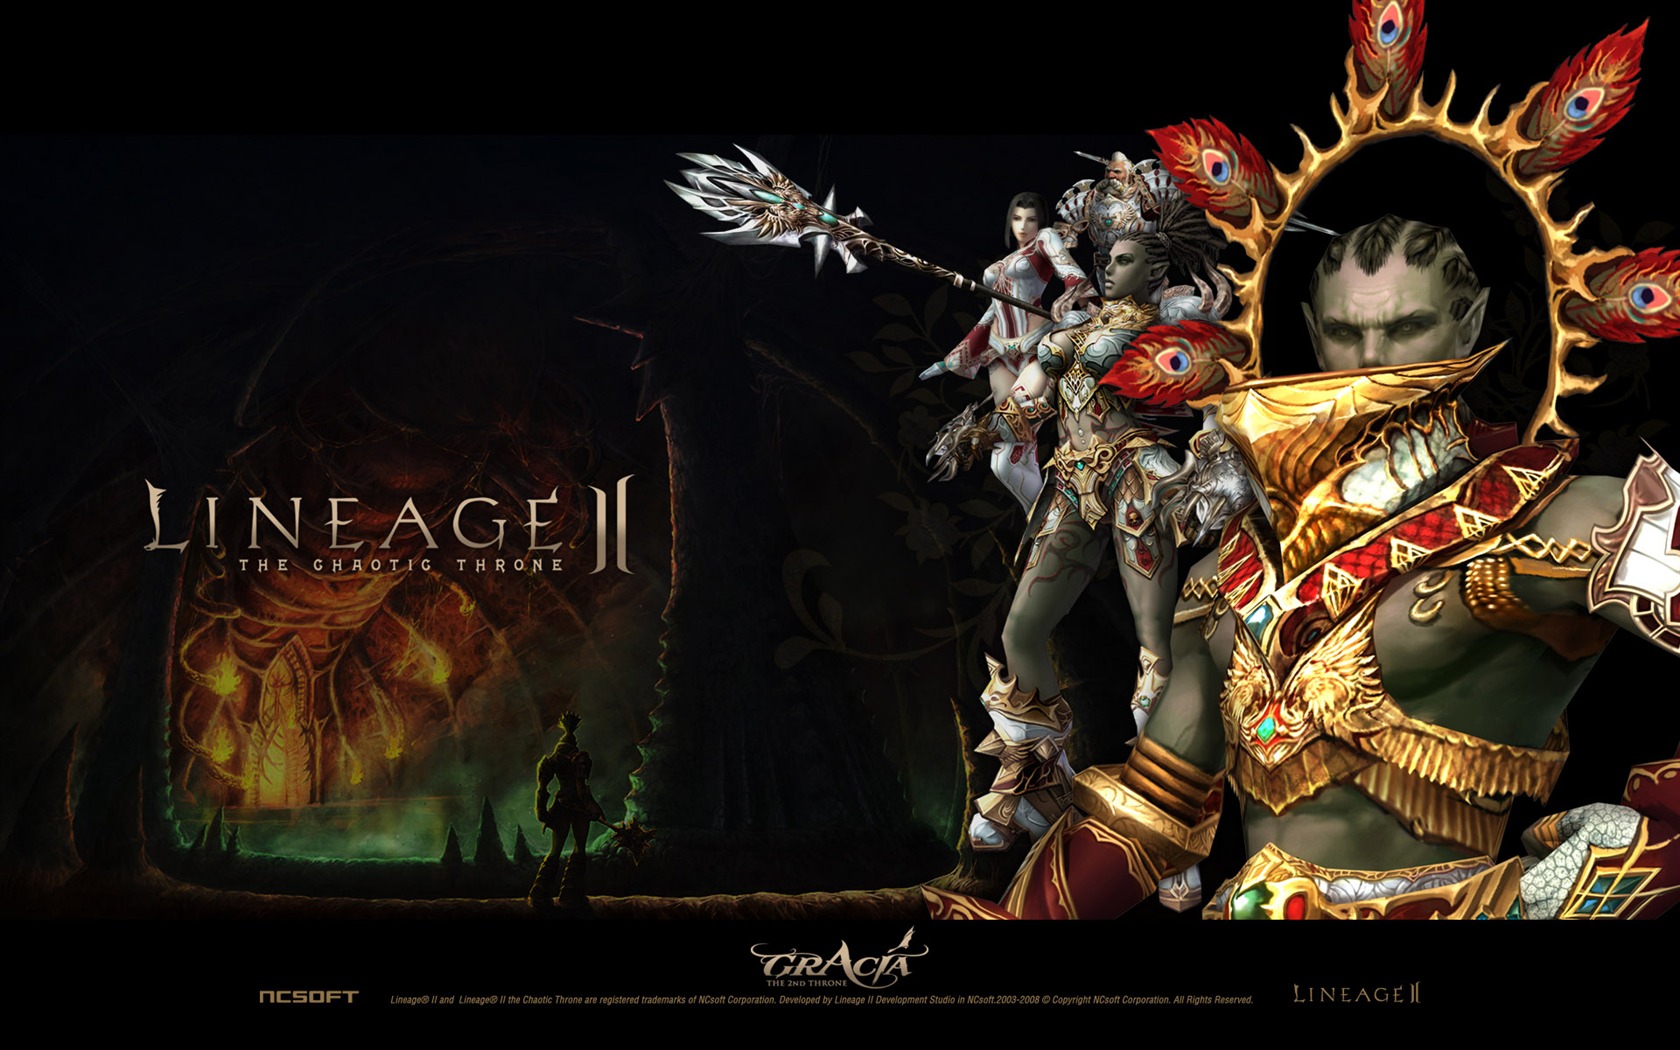 LINEAGE Ⅱ Modellierung HD-Gaming-Wallpaper #2 - 1680x1050